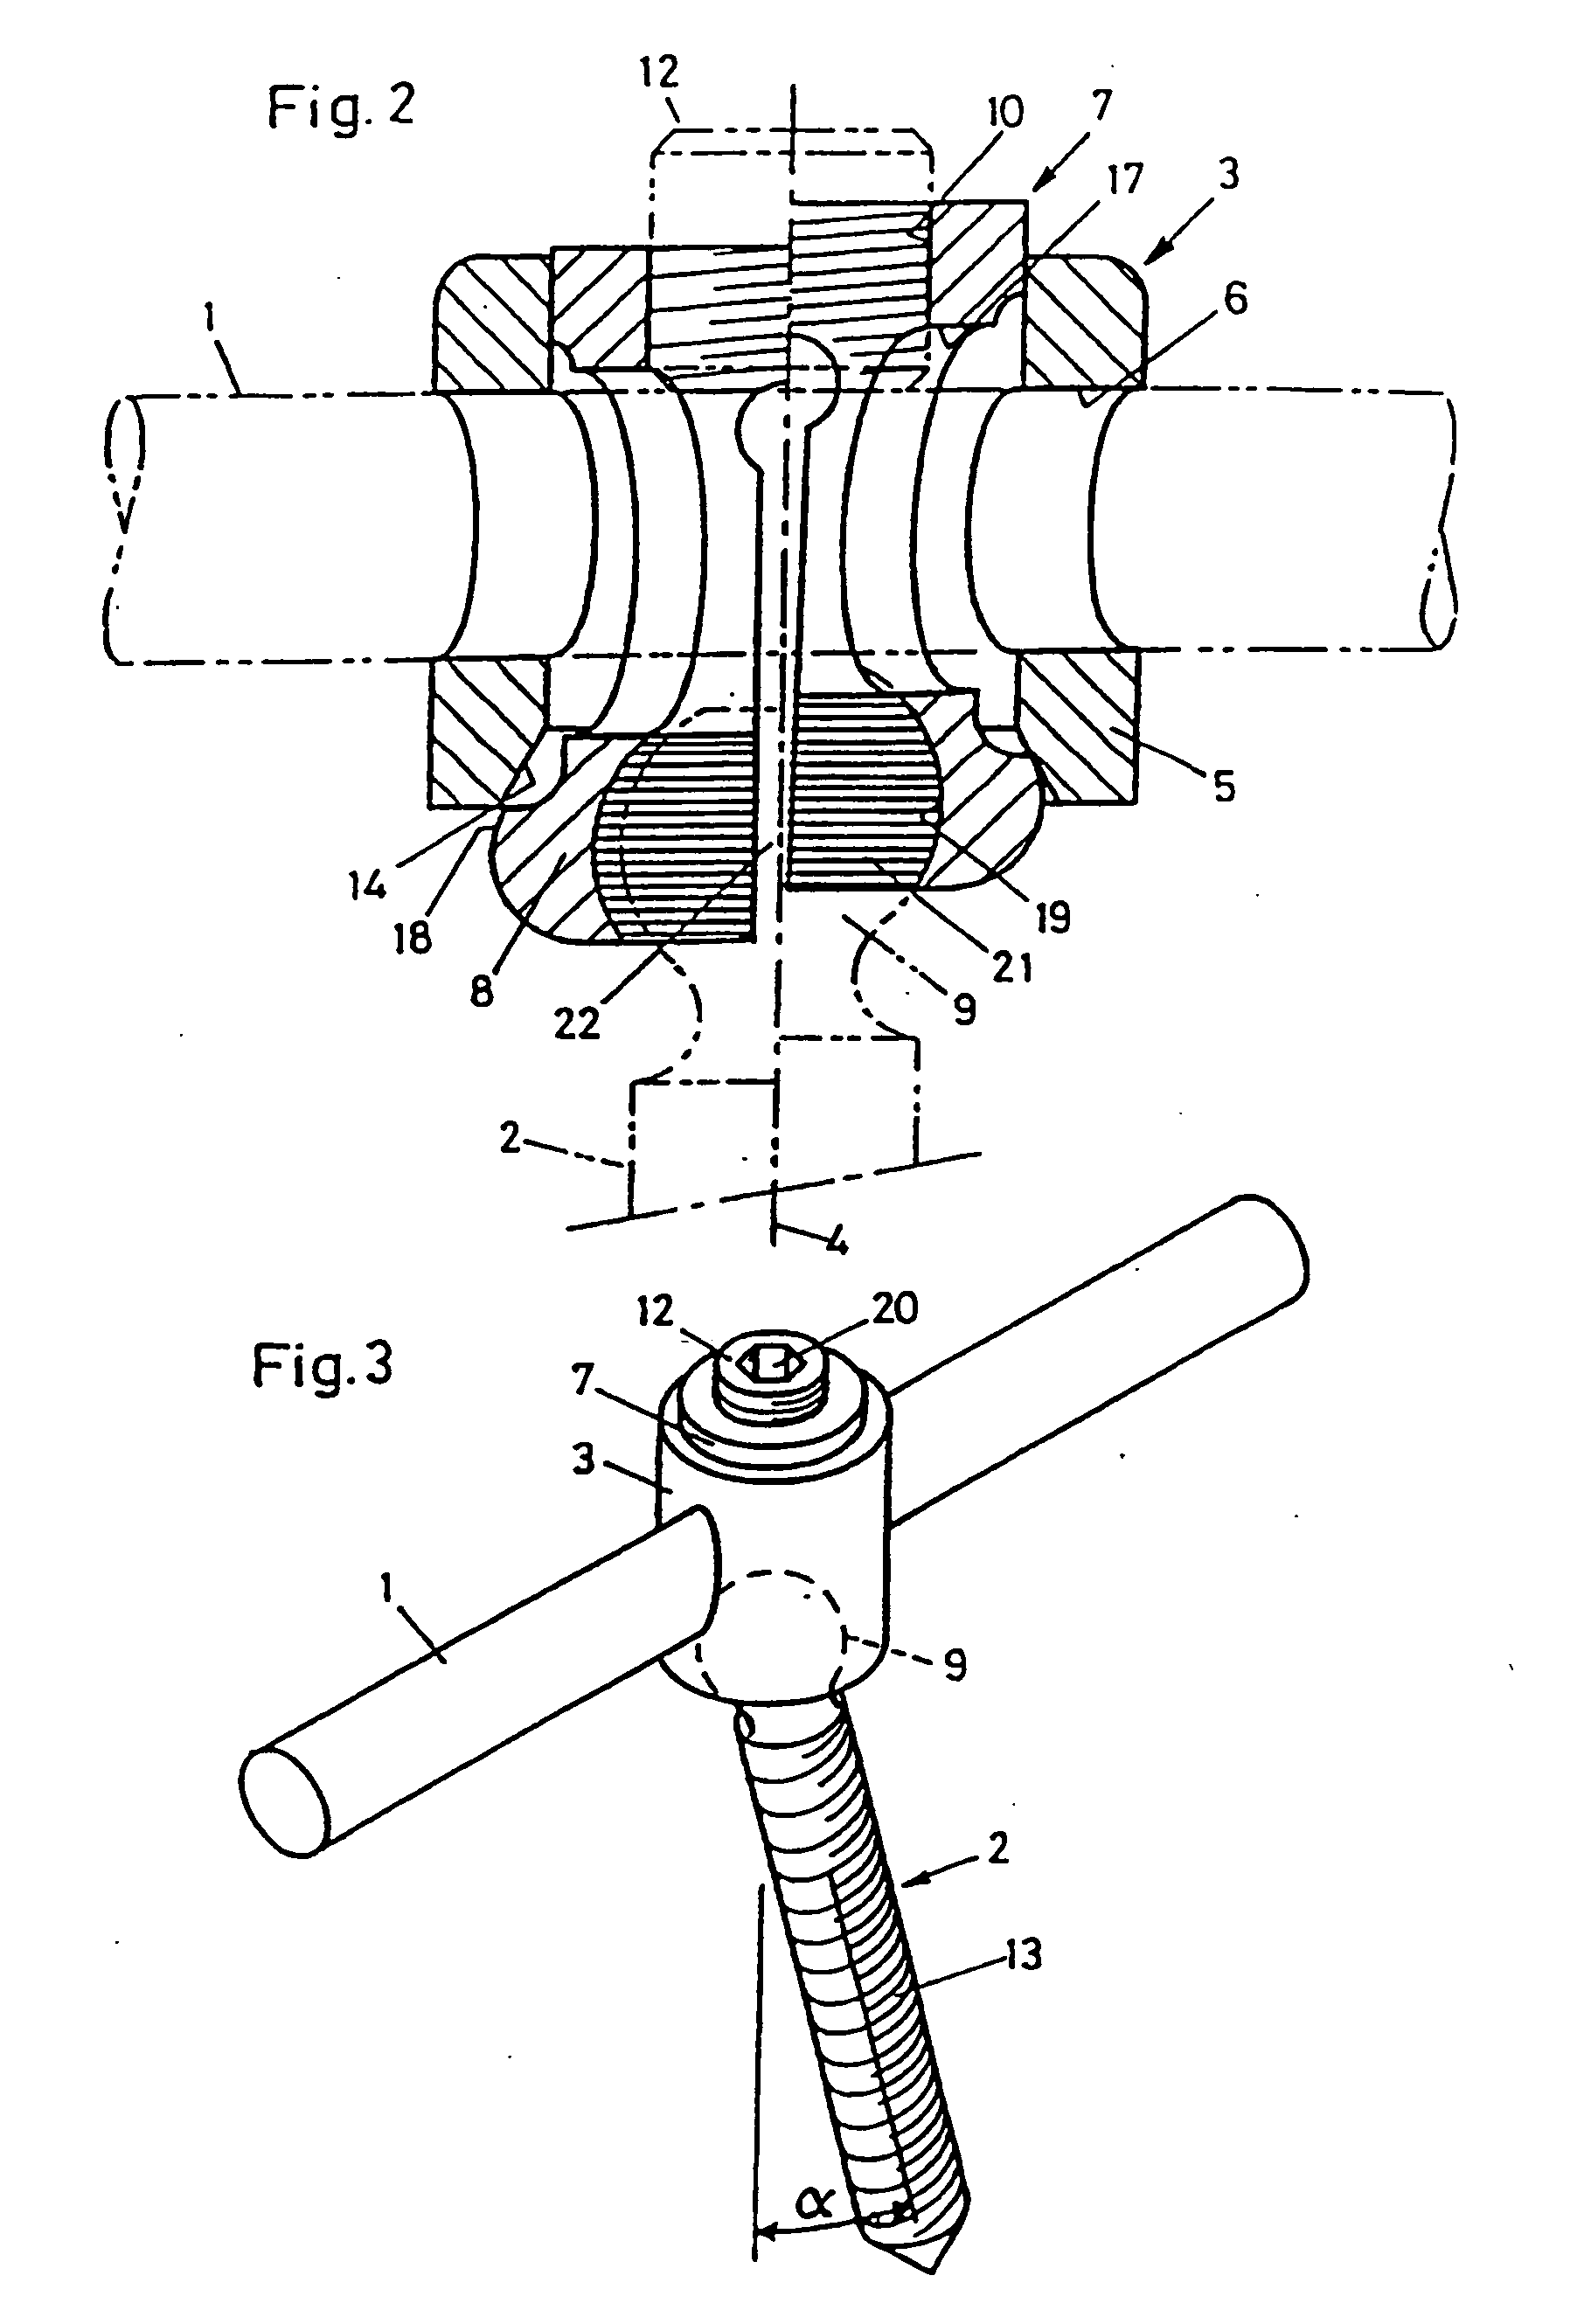 Device for connecting a longitudinal bar to a pedicle screw